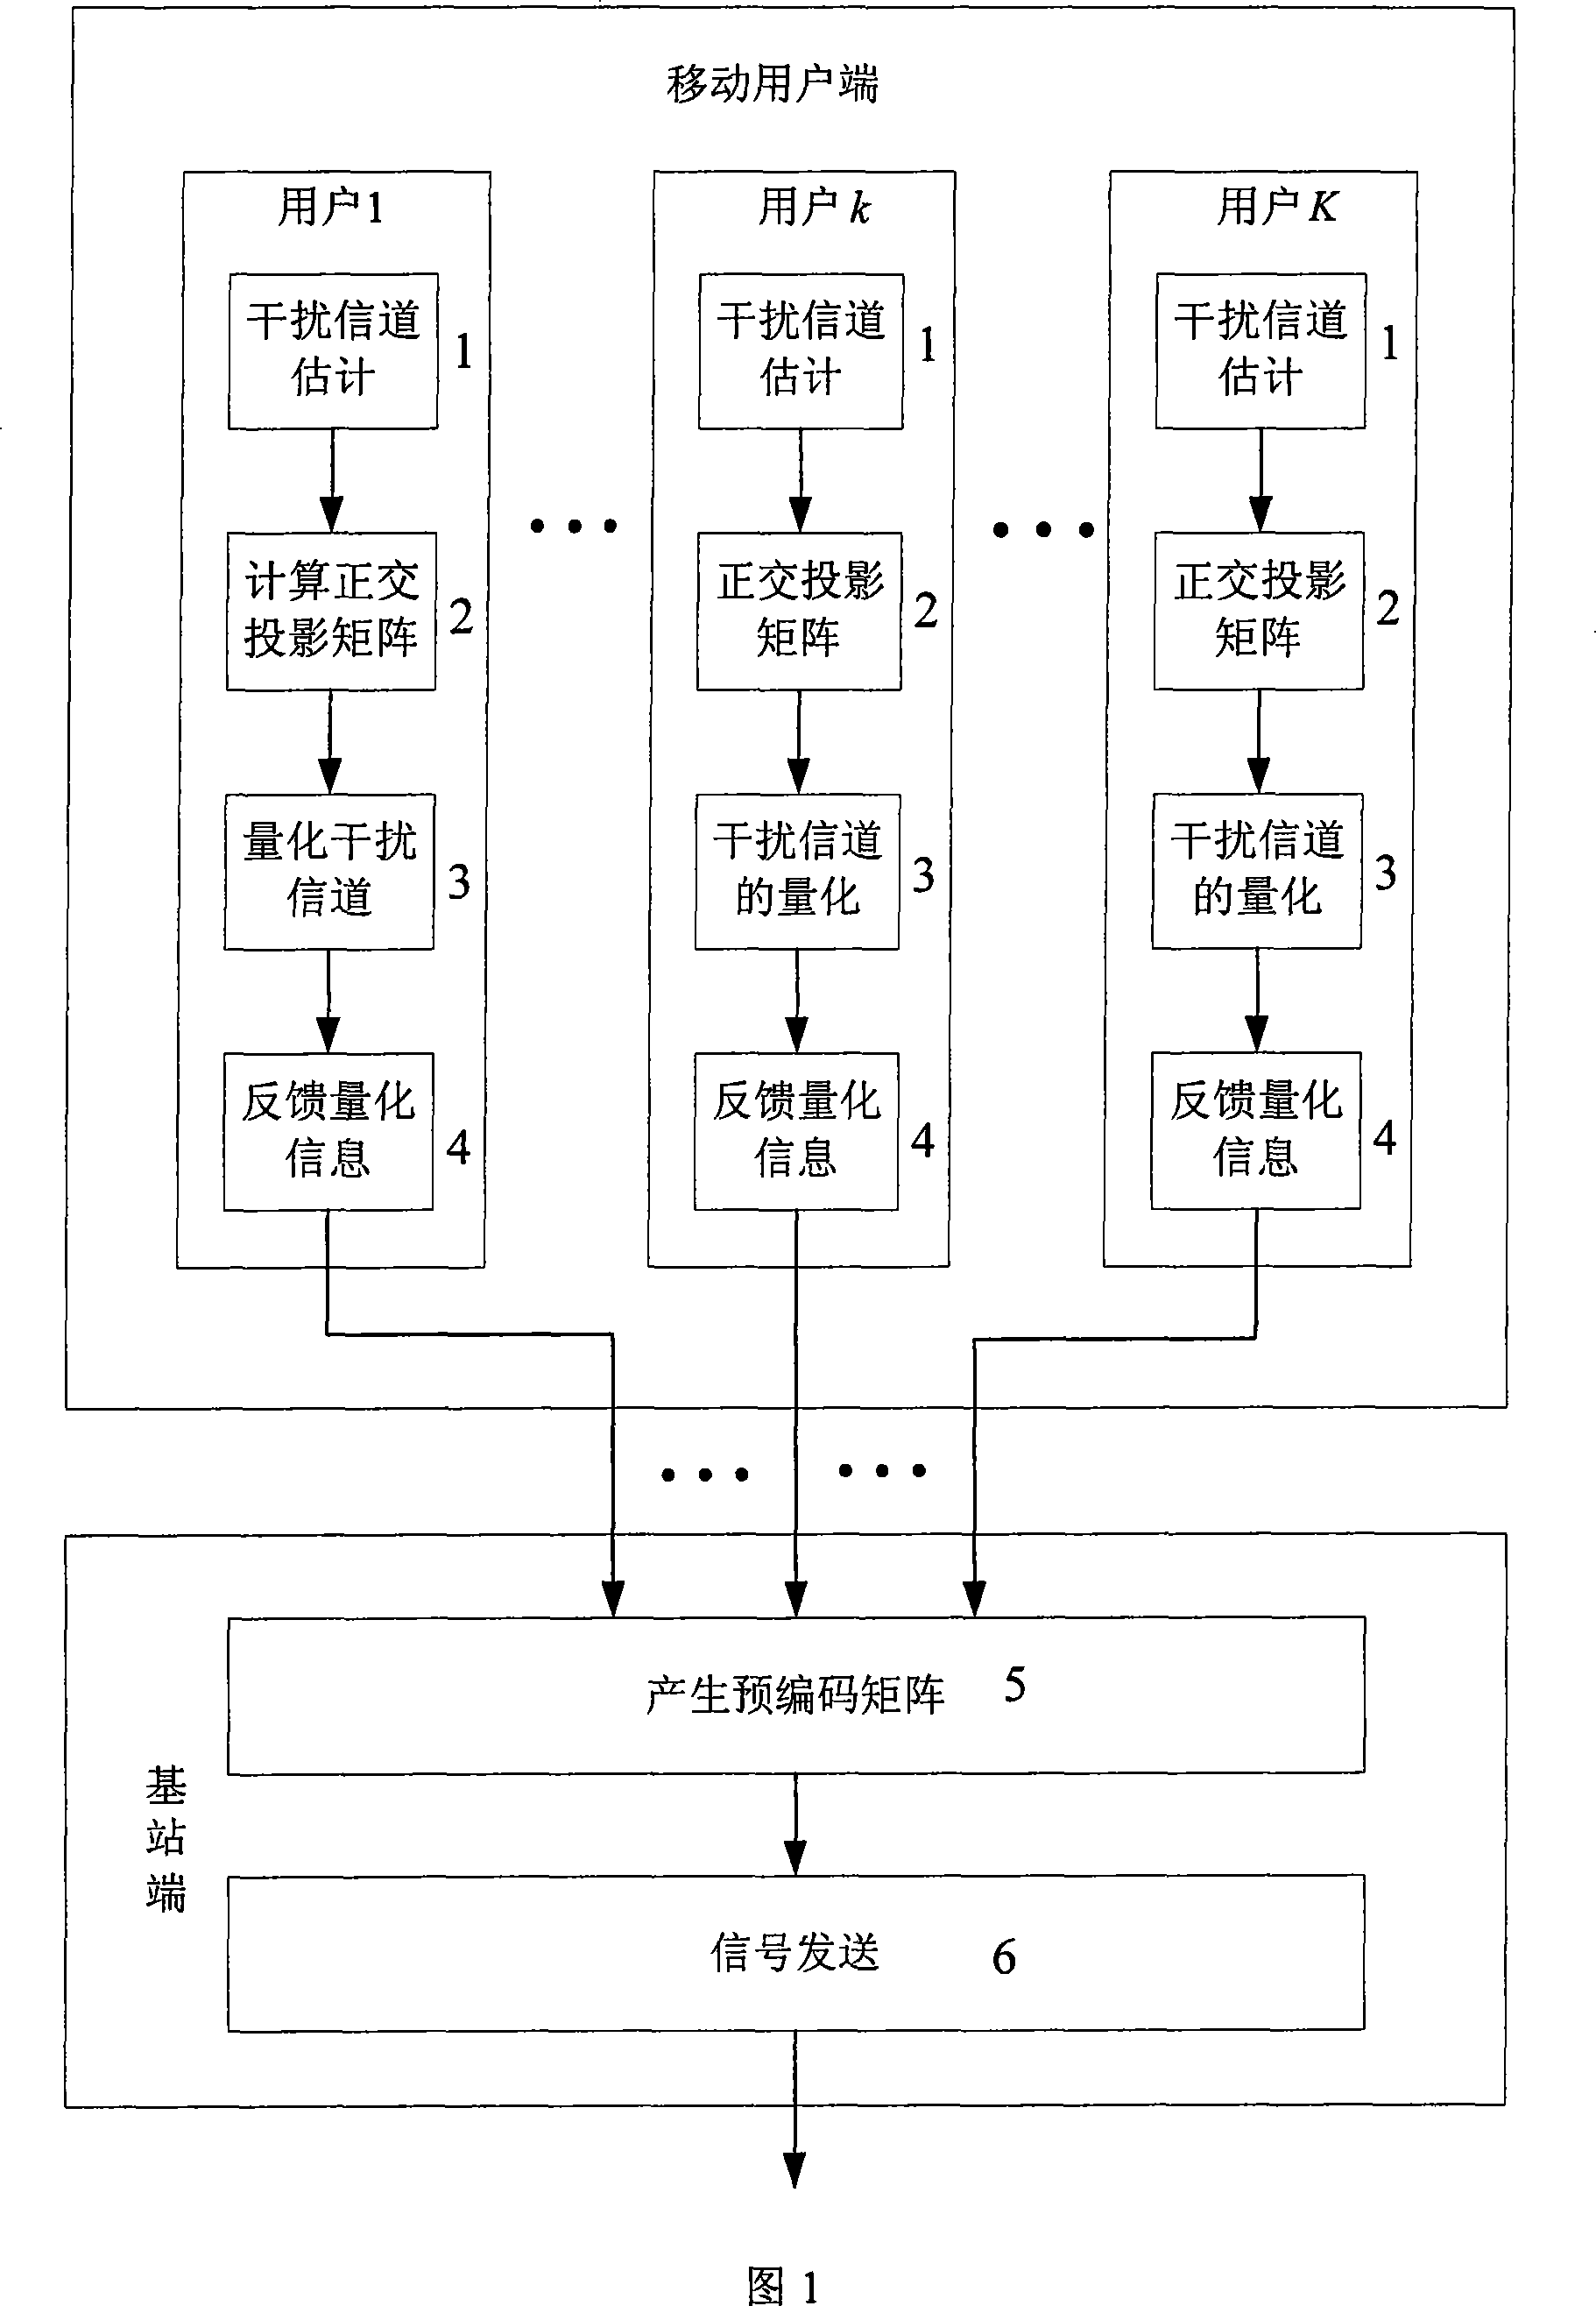 Limiting feedback precoding interference suppression method of multi-antenna multi-cell system